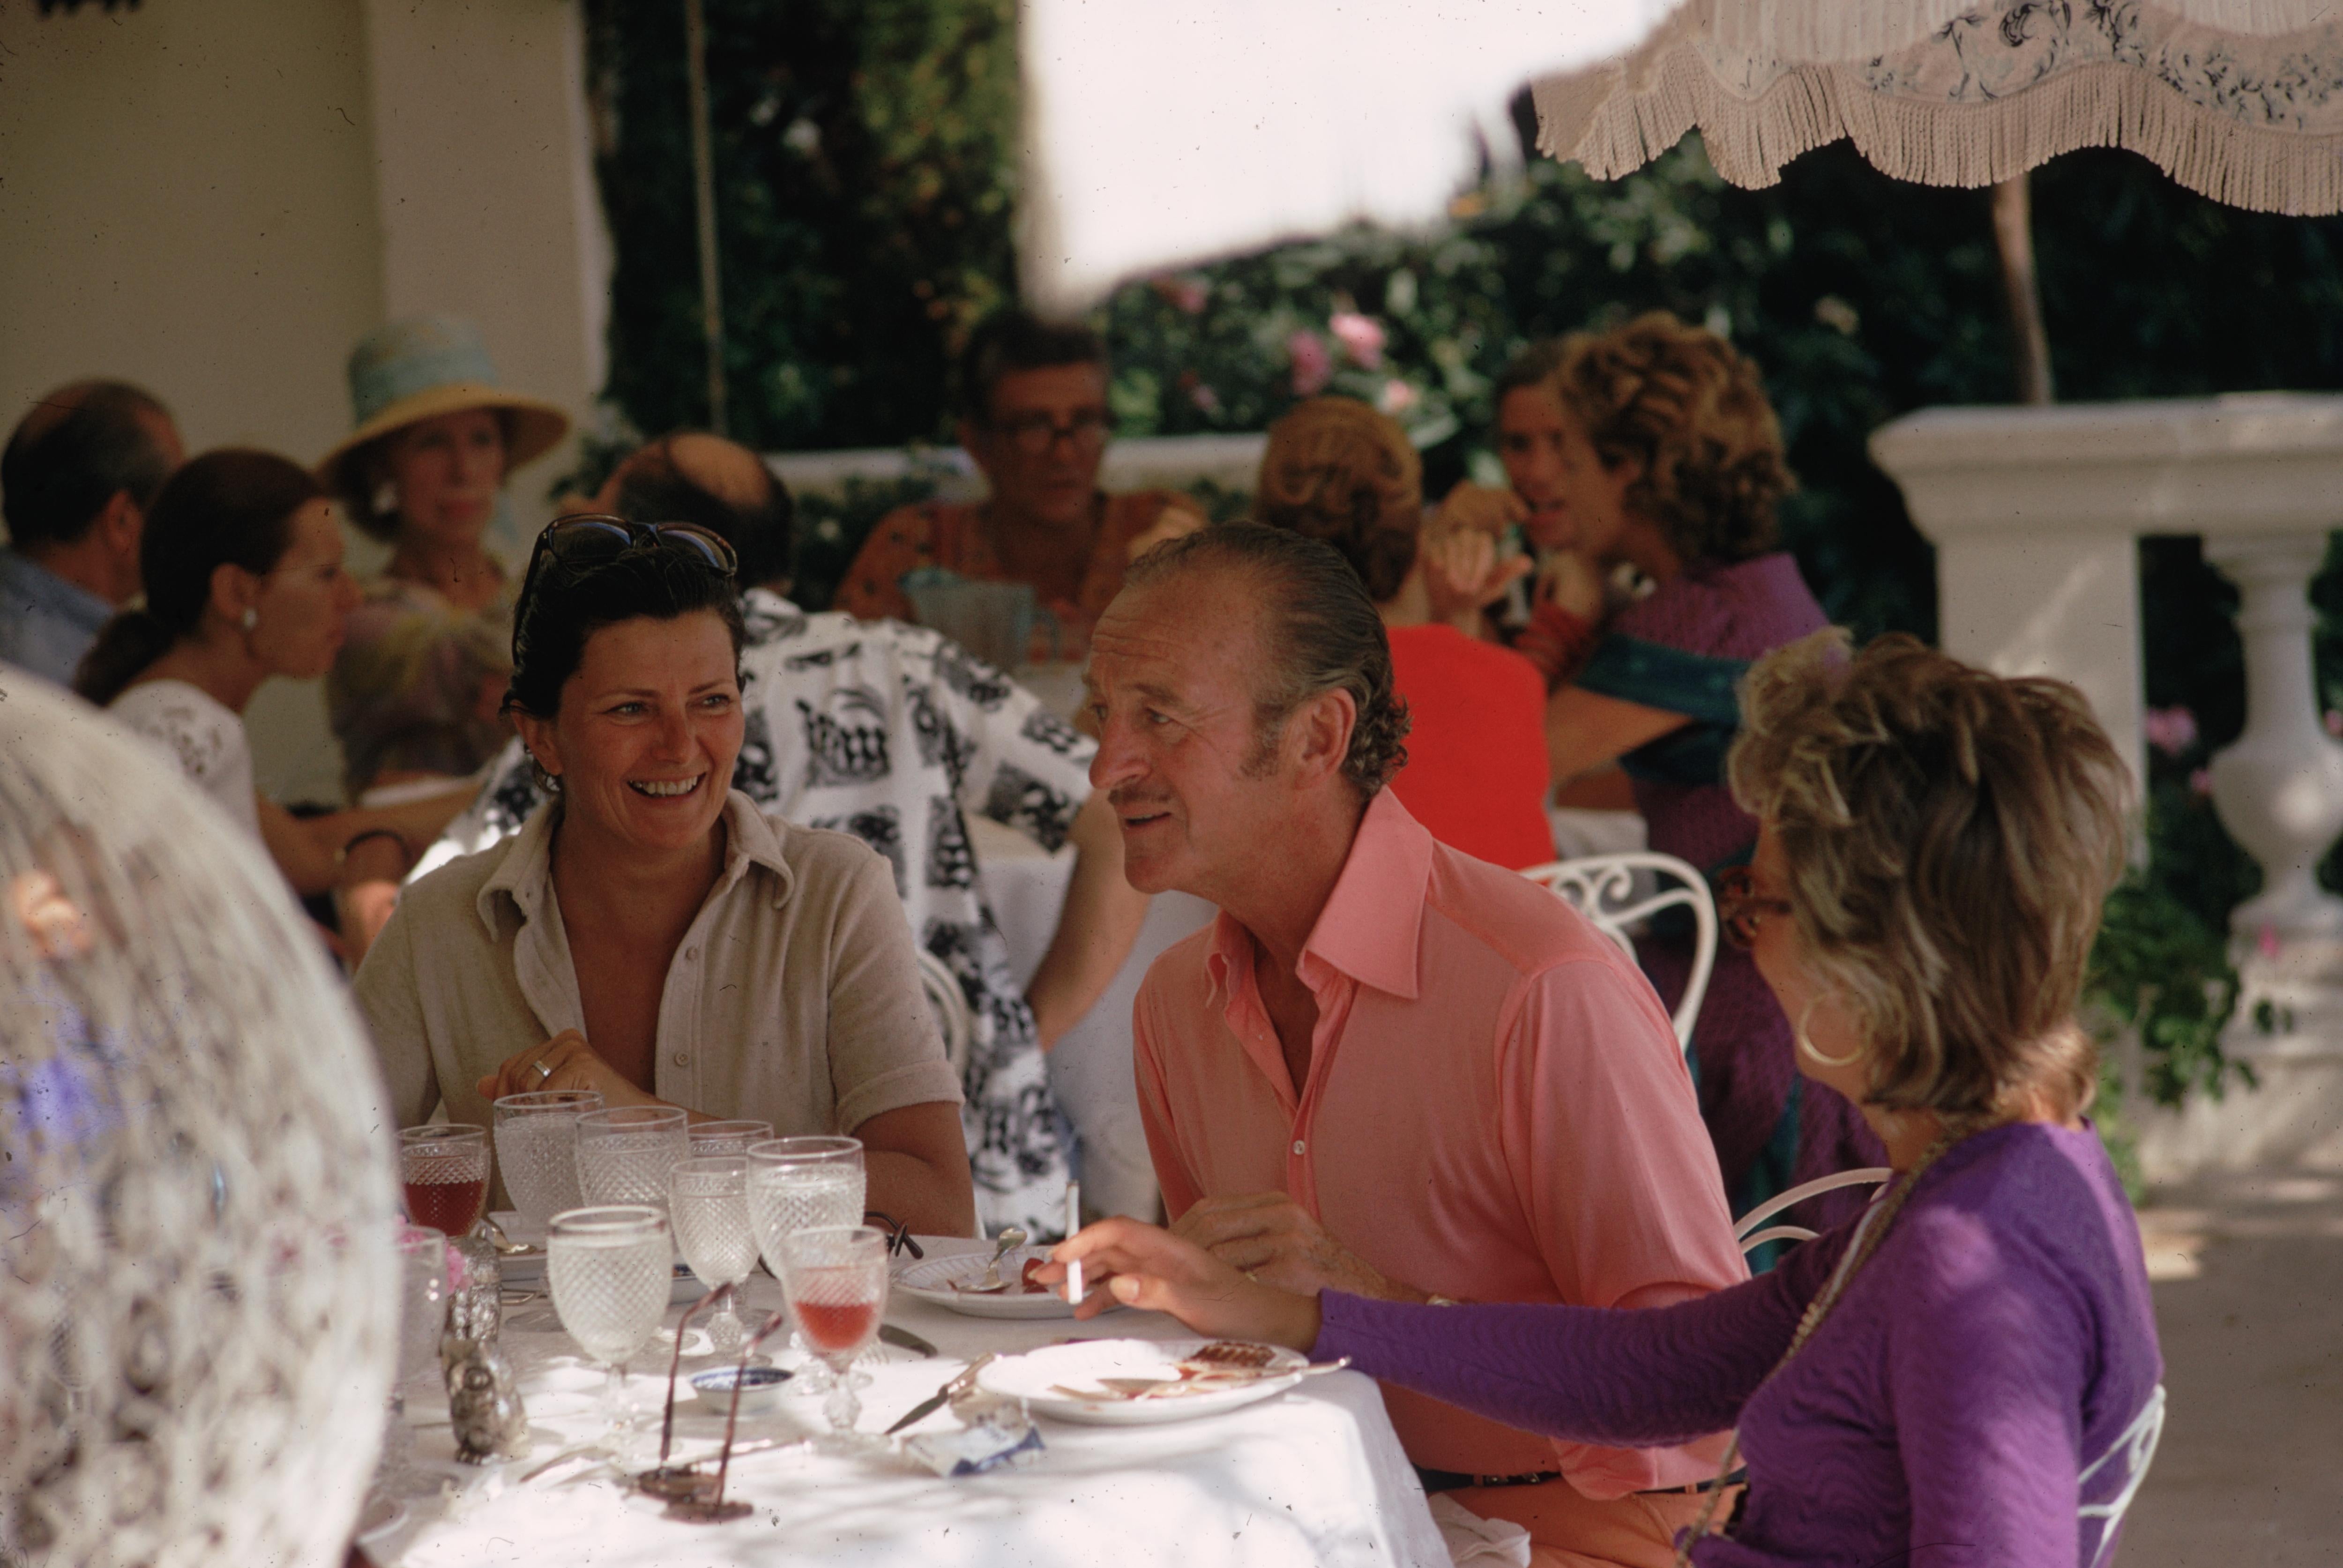 'David Niven' 1970 Slim Aarons Limited Estate Edition Print 

August 1970: Actor David Niven (1910 - 1983) relaxing with friends in Monte Carlo.

Produced from the original transparency
Certificate of authenticity supplied 
Archive stamped

Paper